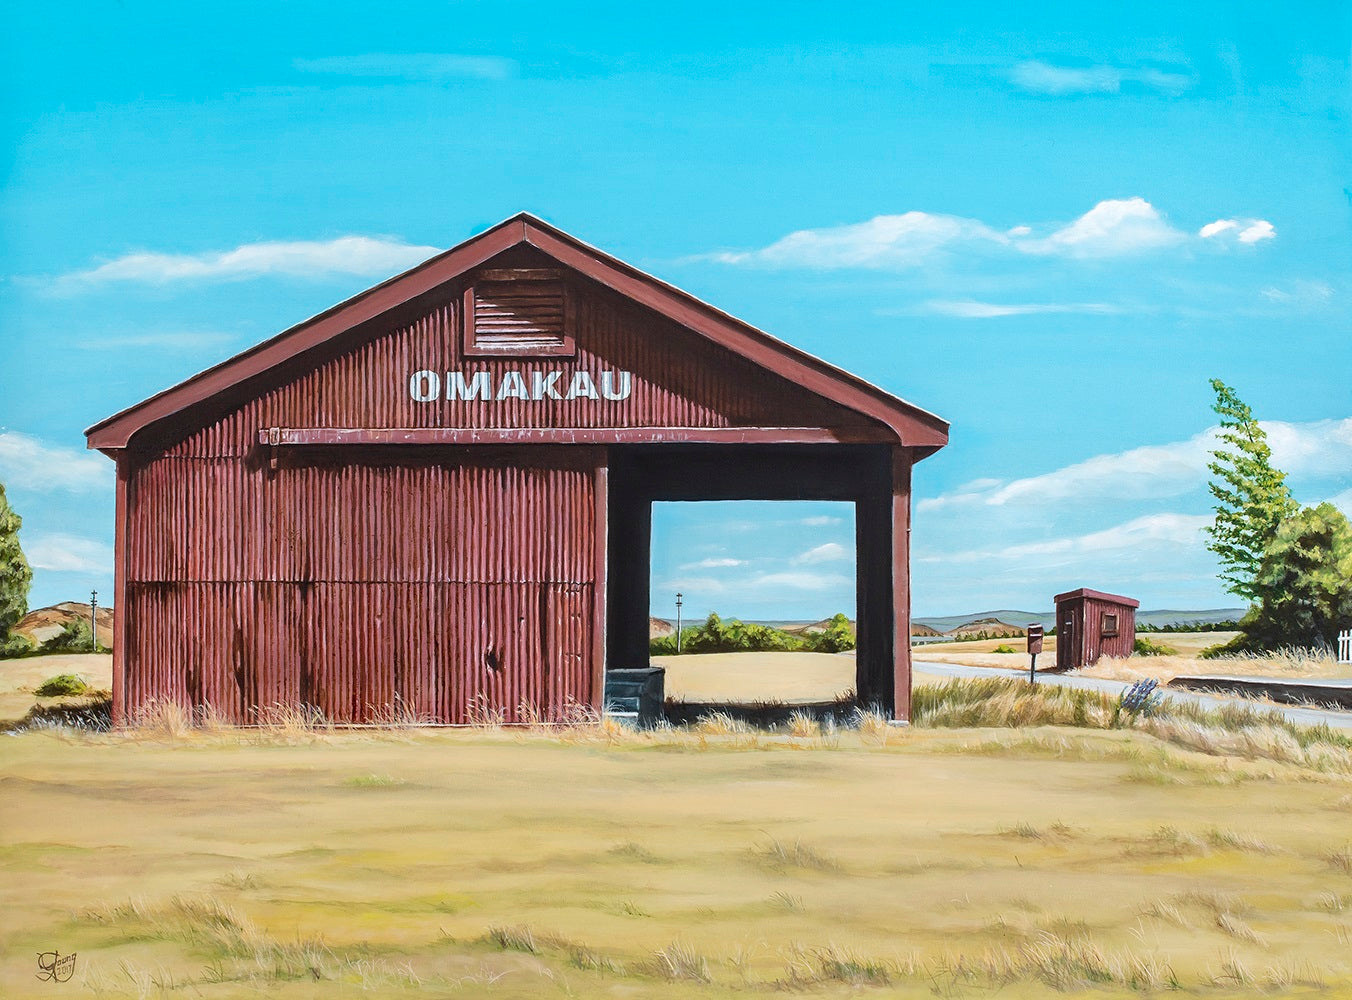 Omakau Rail Shed Prints - grahamyoungartist.com - Original Artwork and Prints by New Zealand Artist Graham Young